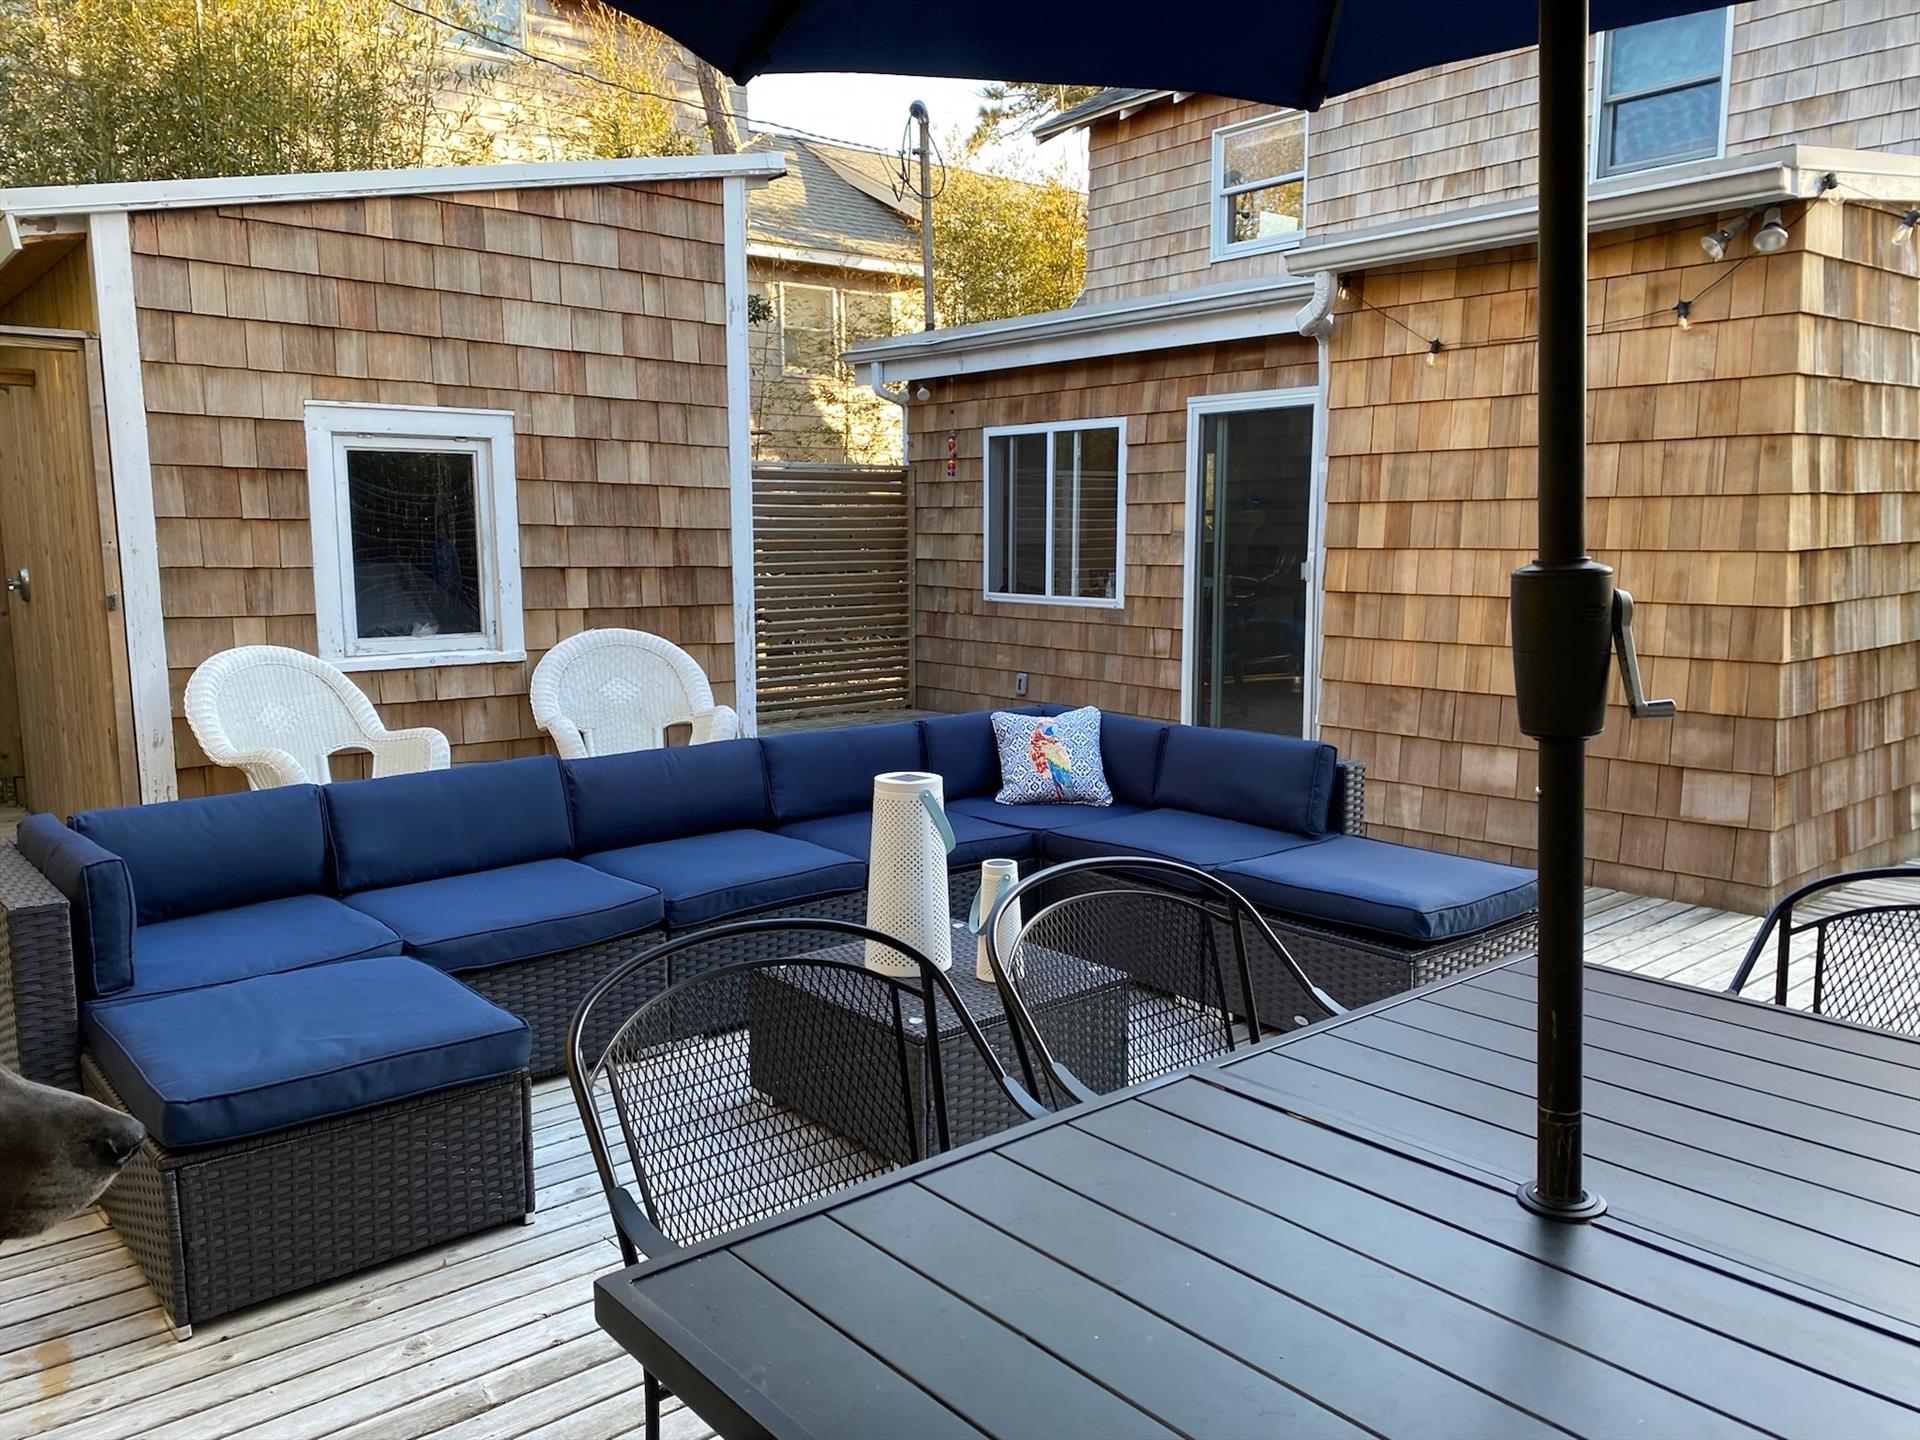 Charming 3 BR home on the east end of OB. Enjoy the luxury or being just a short walk to Seaview and to town. This home has all bedding, towels, beach chairs, bikes, wagon, BBQ and household basics provided. Nice private deck, pet friendly, and fabulous outdoor shower. 
<br>
